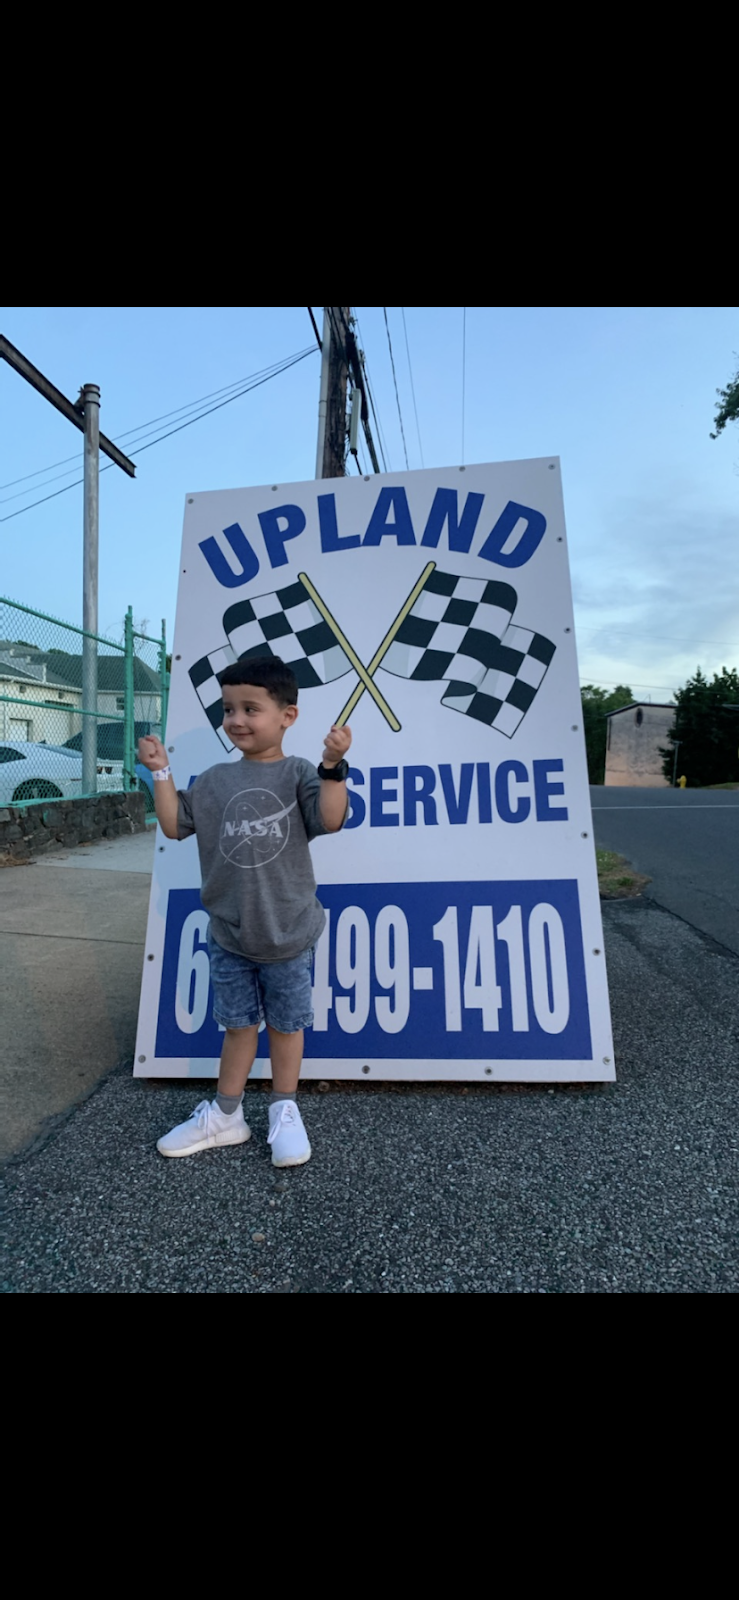 Upland Auto Services | 501 Upland Ave, Brookhaven, PA 19015 | Phone: (610) 499-1410